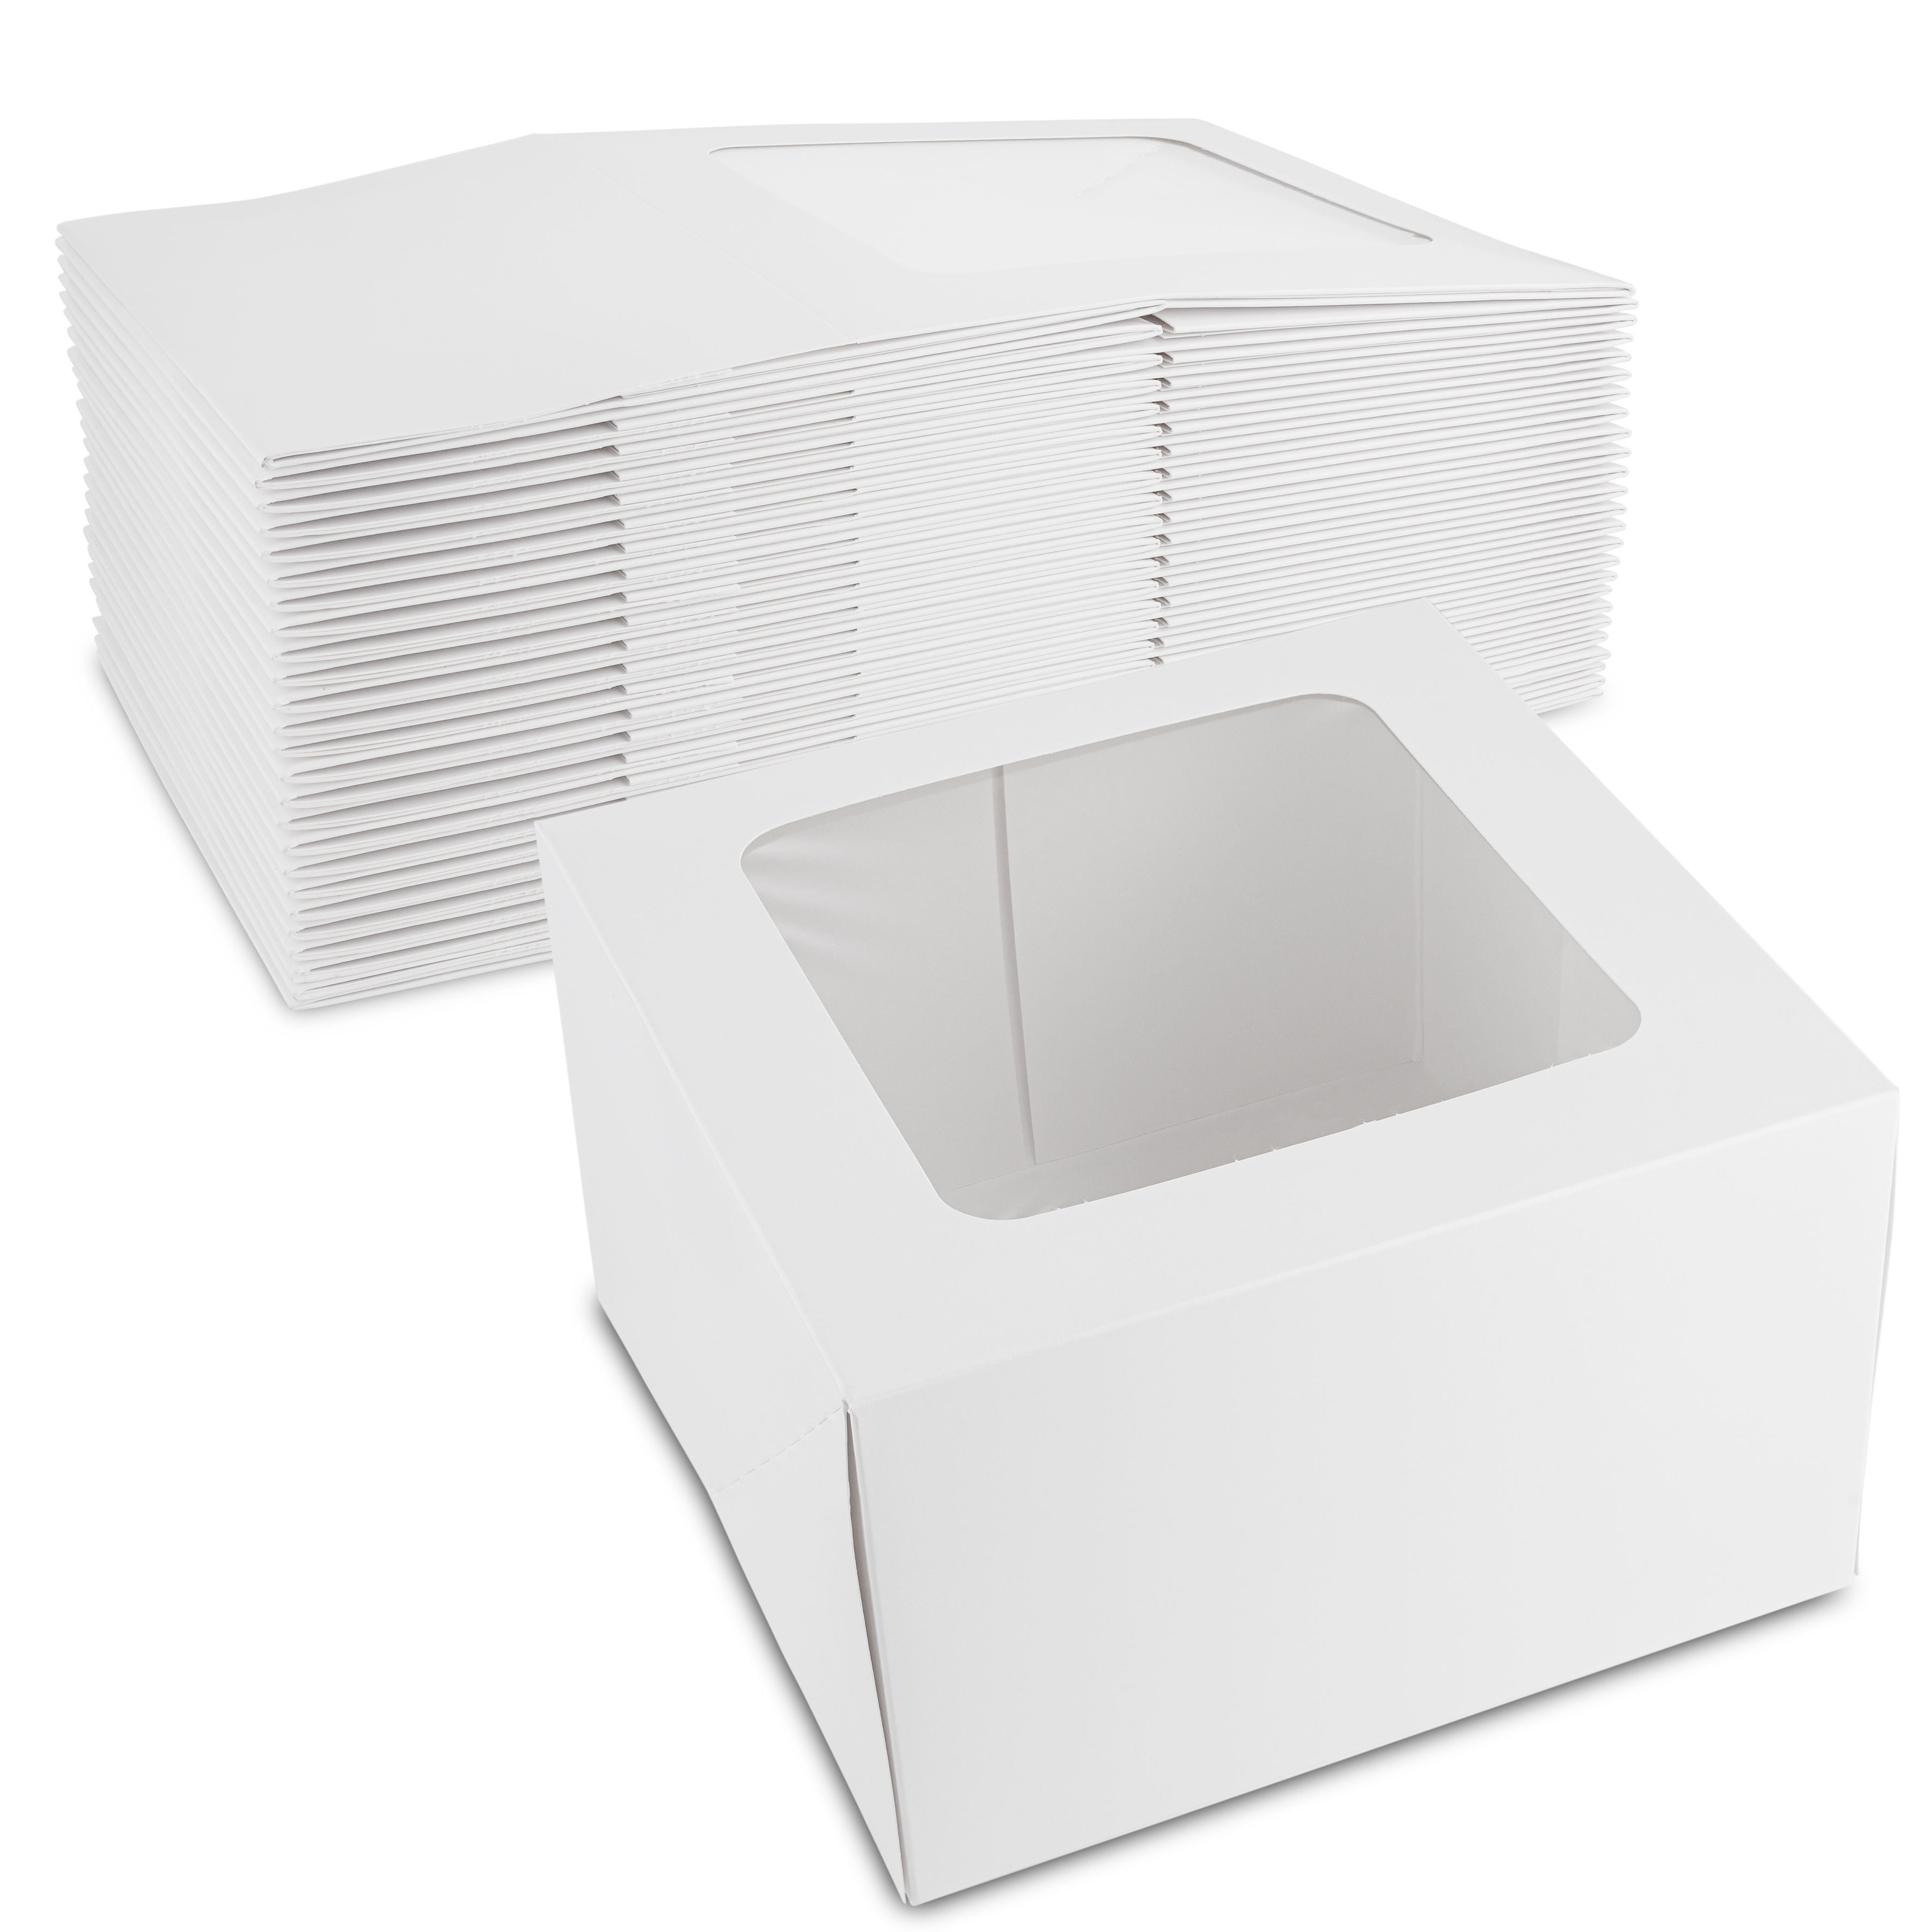 15 Pieces 8" x 8"  x 2 1/2"  White  Auto-Popup Bakery Box by MT Products 